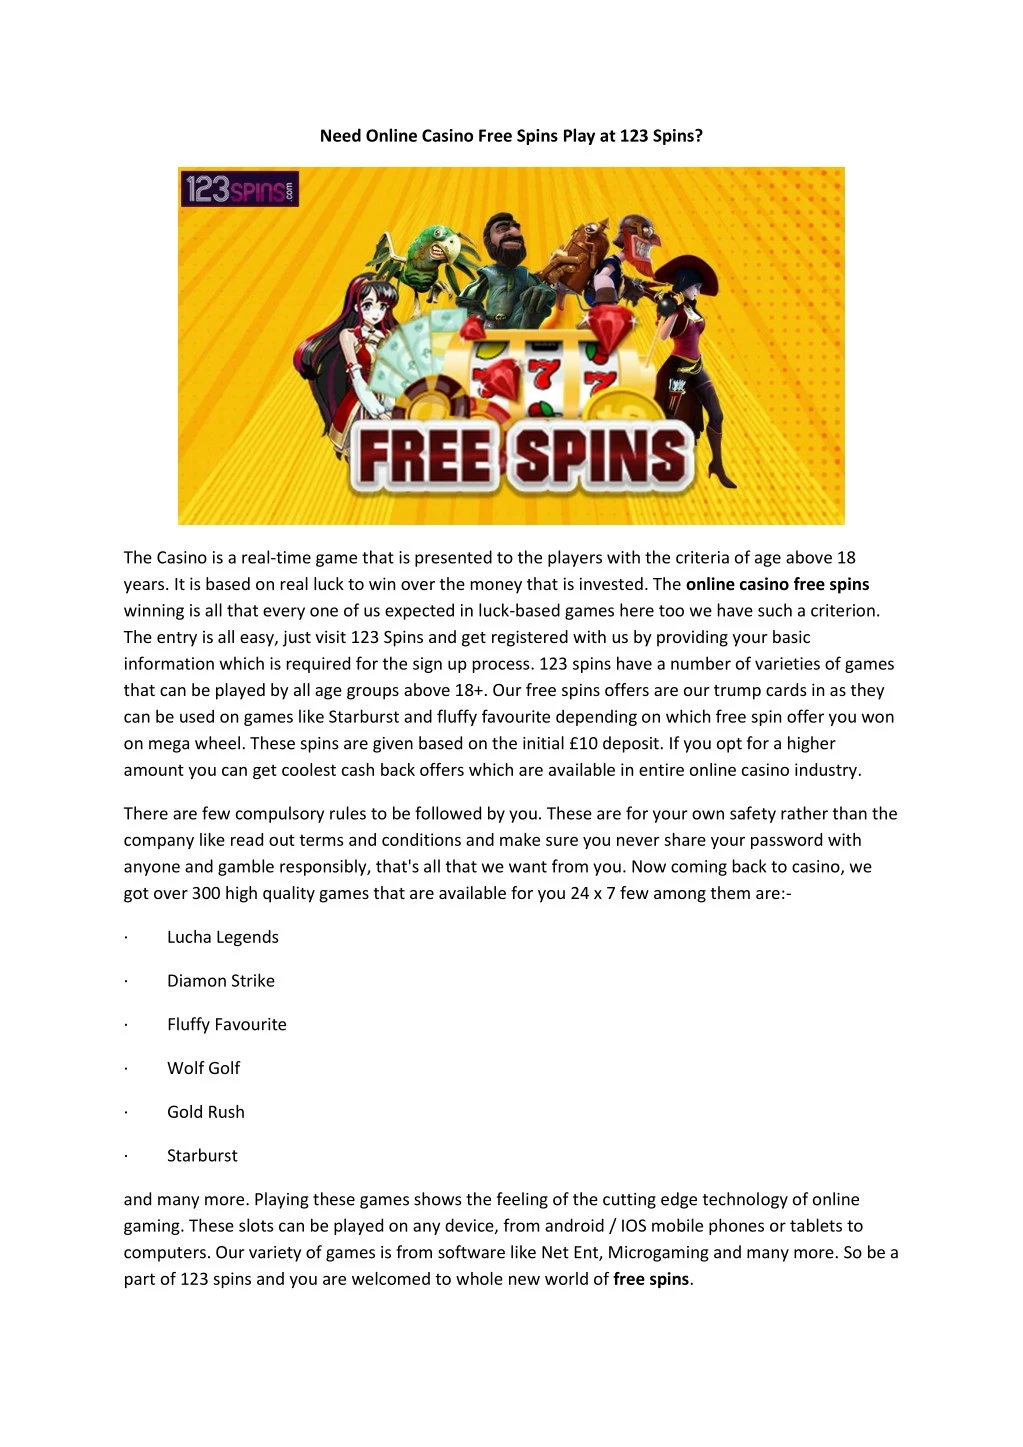 need online casino free spins play at 123 spins n.